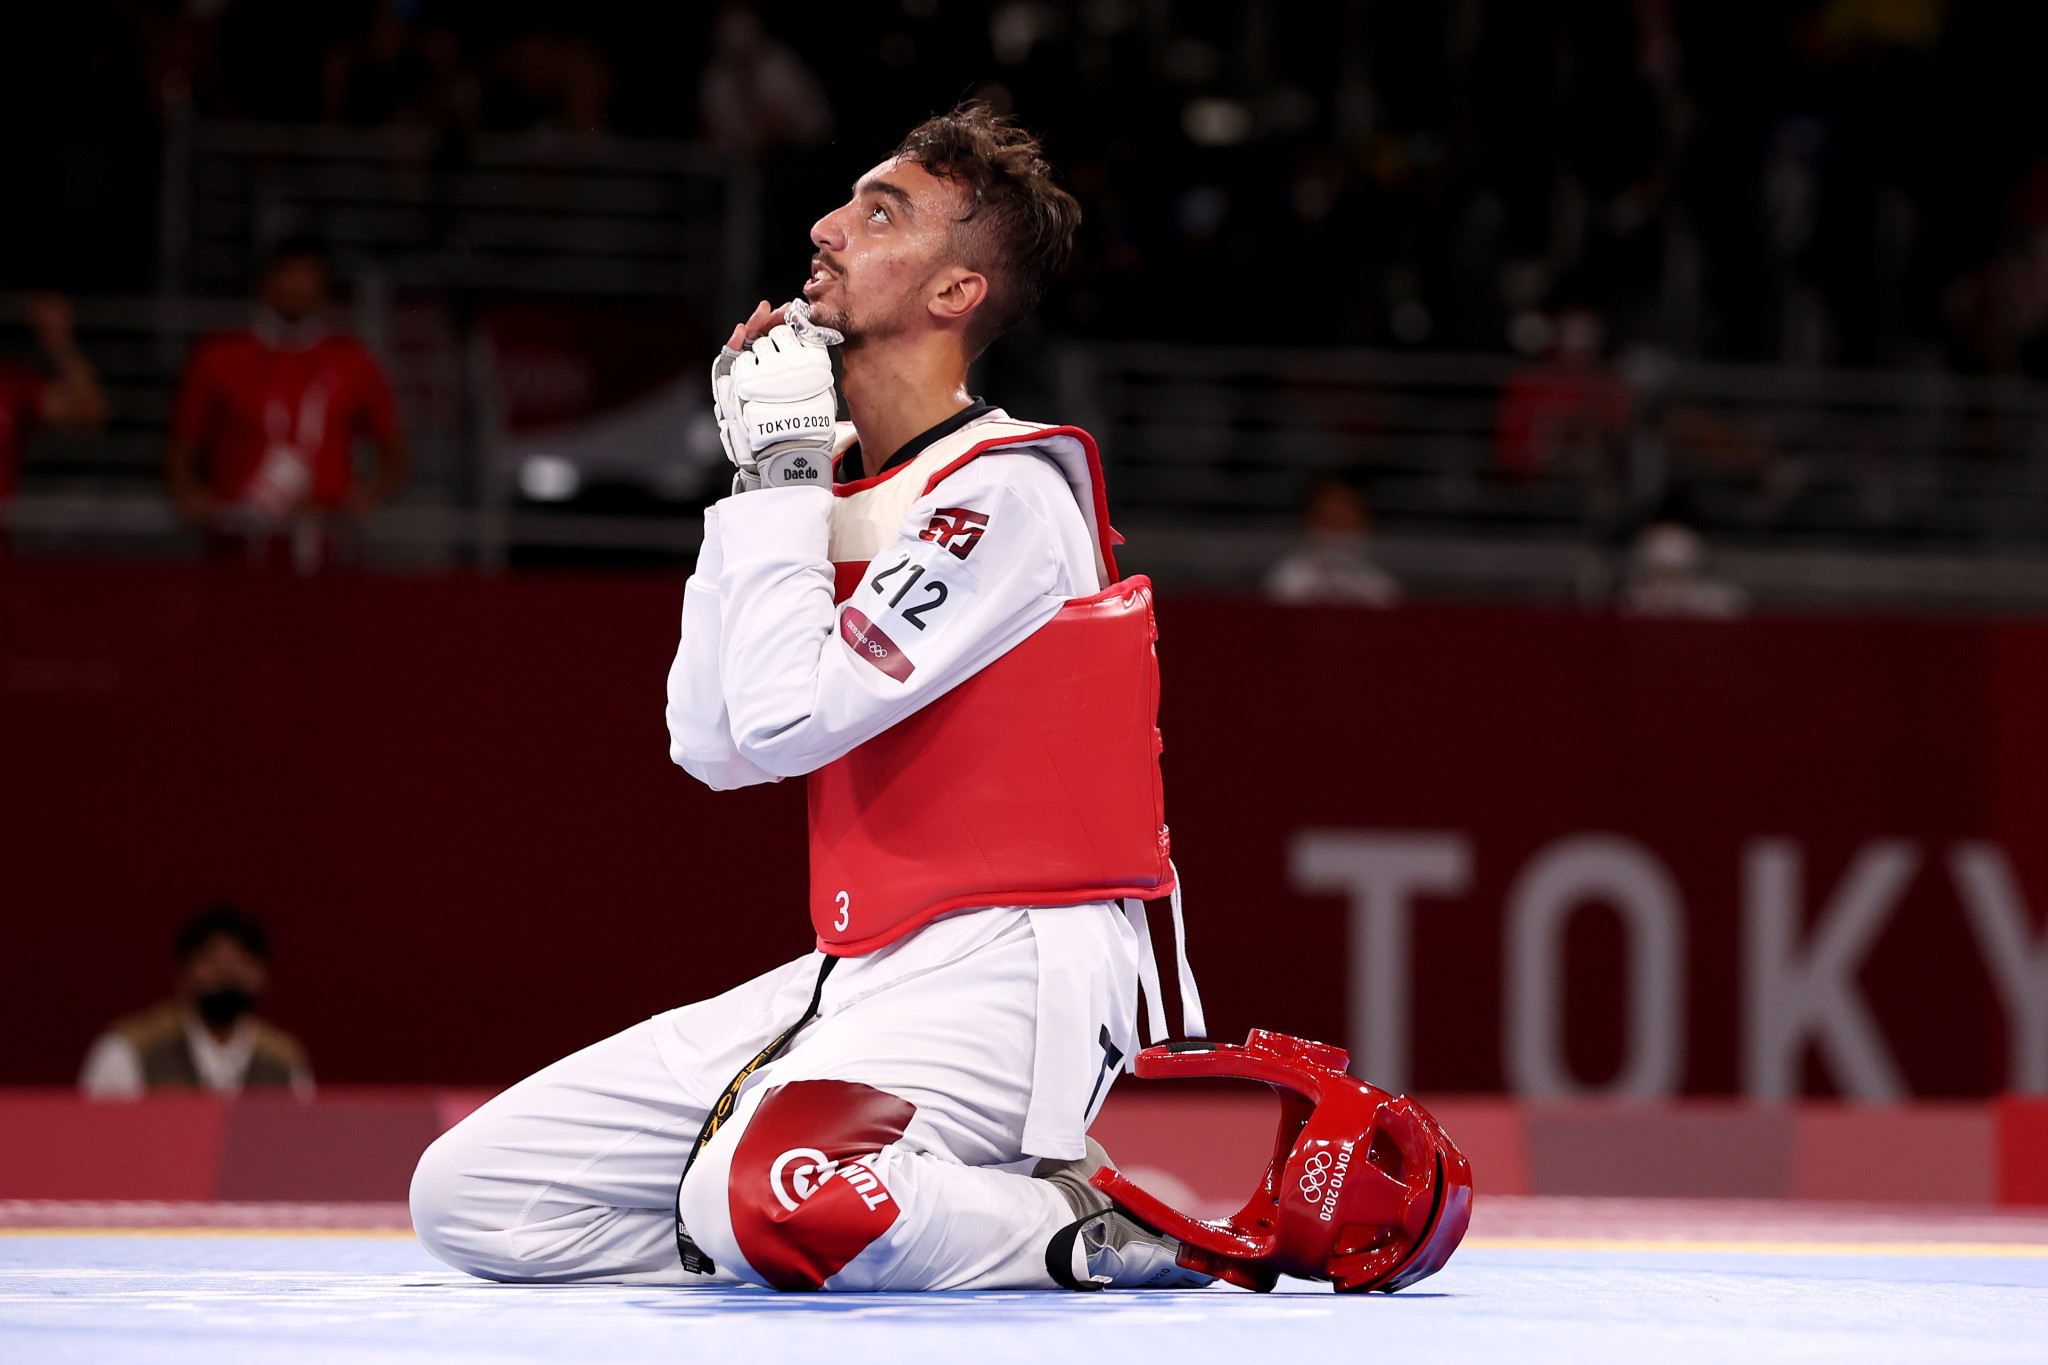 Mohamed Khalil Jendoubi won one of Tunisia's two medals at the African Taekwondo Championships  ©Getty Images